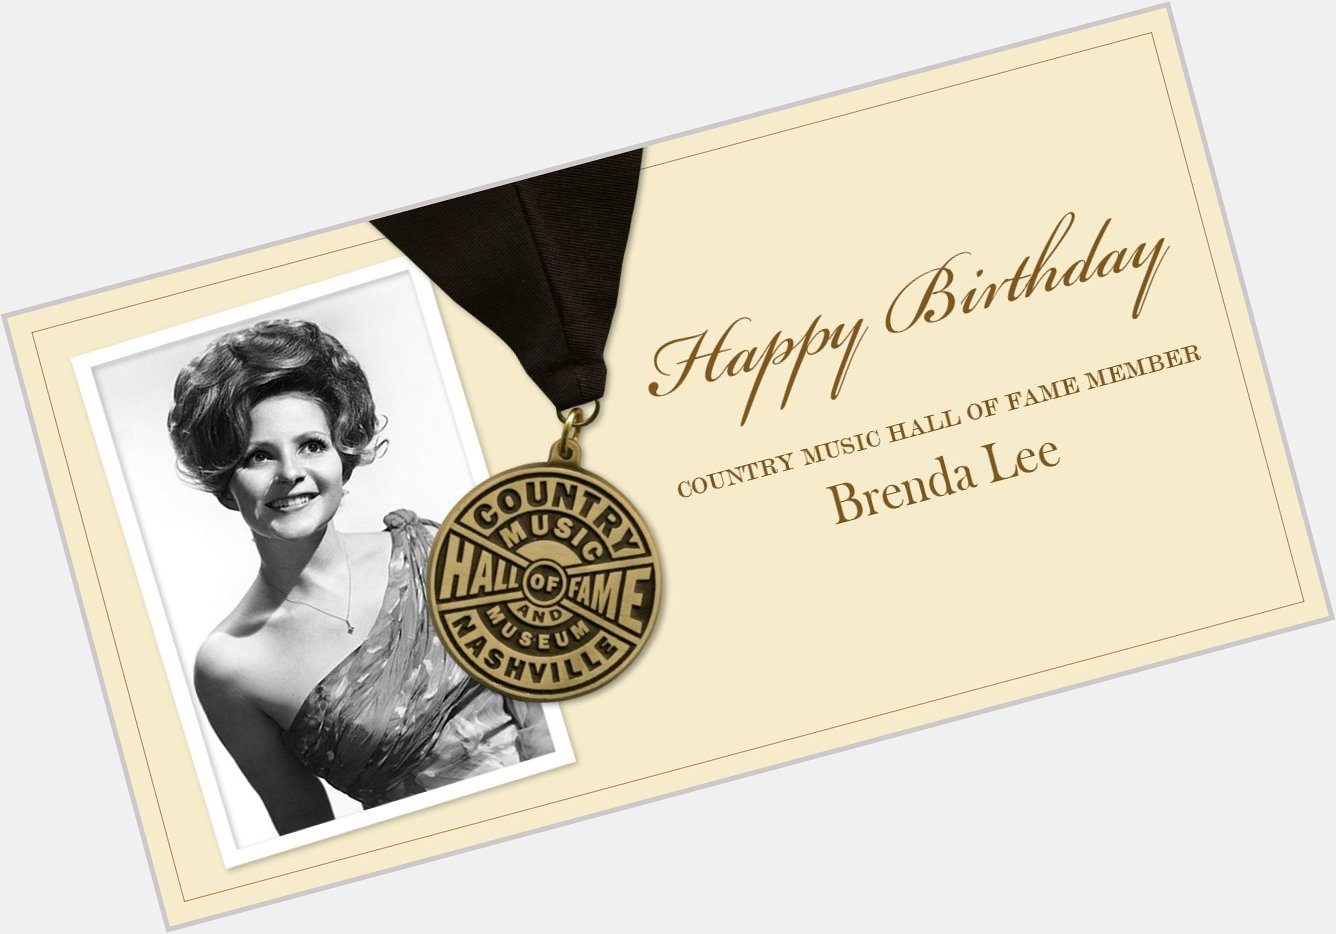 Join us in wishing Country Music Hall of Fame member Brenda Lee a very happy birthday! 